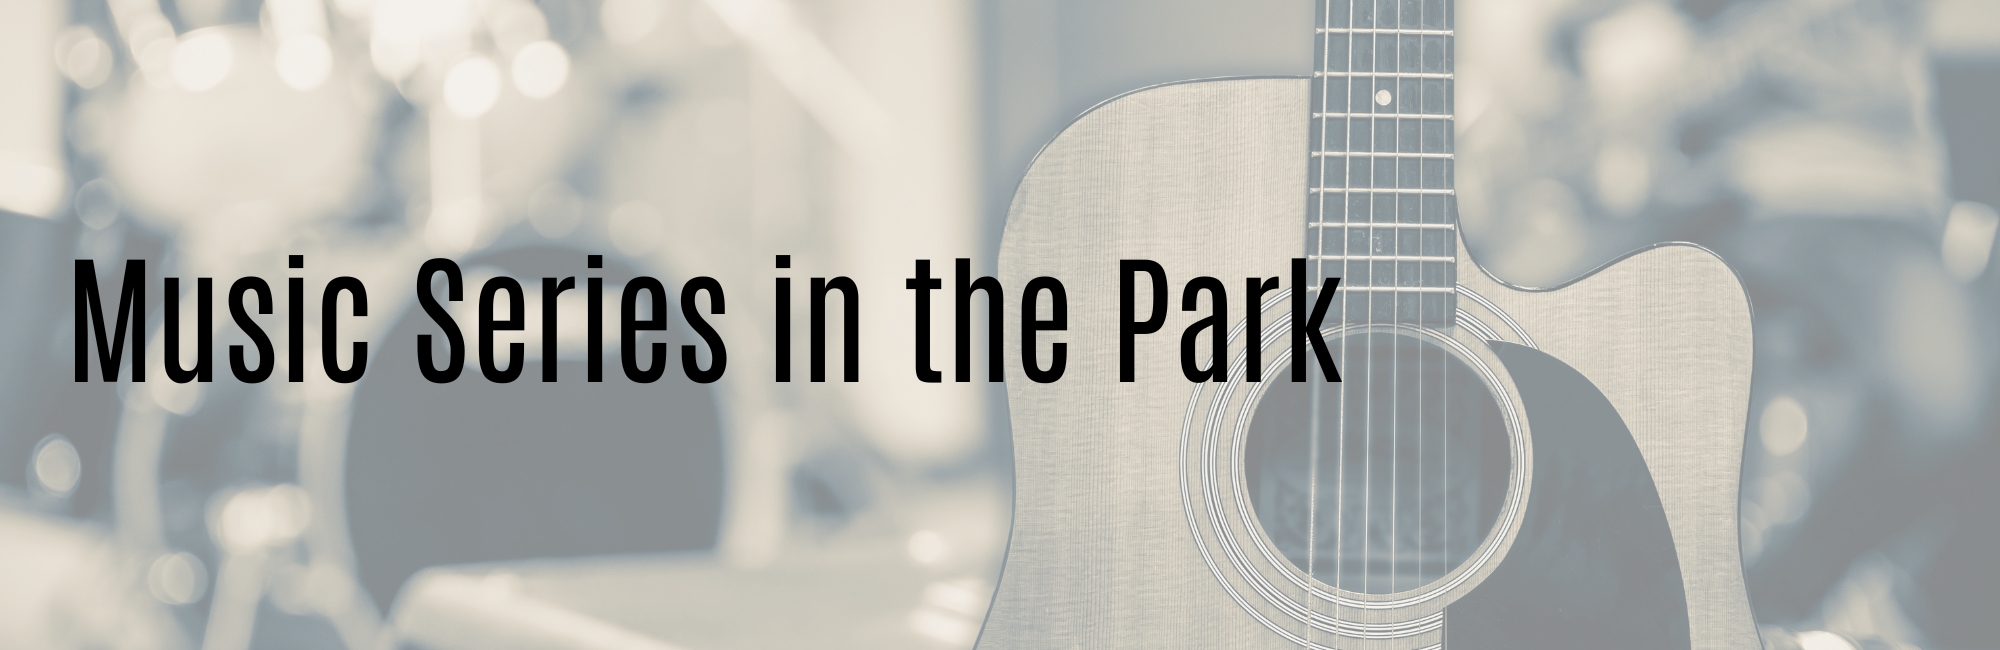 Music Series in the Park Website Banner